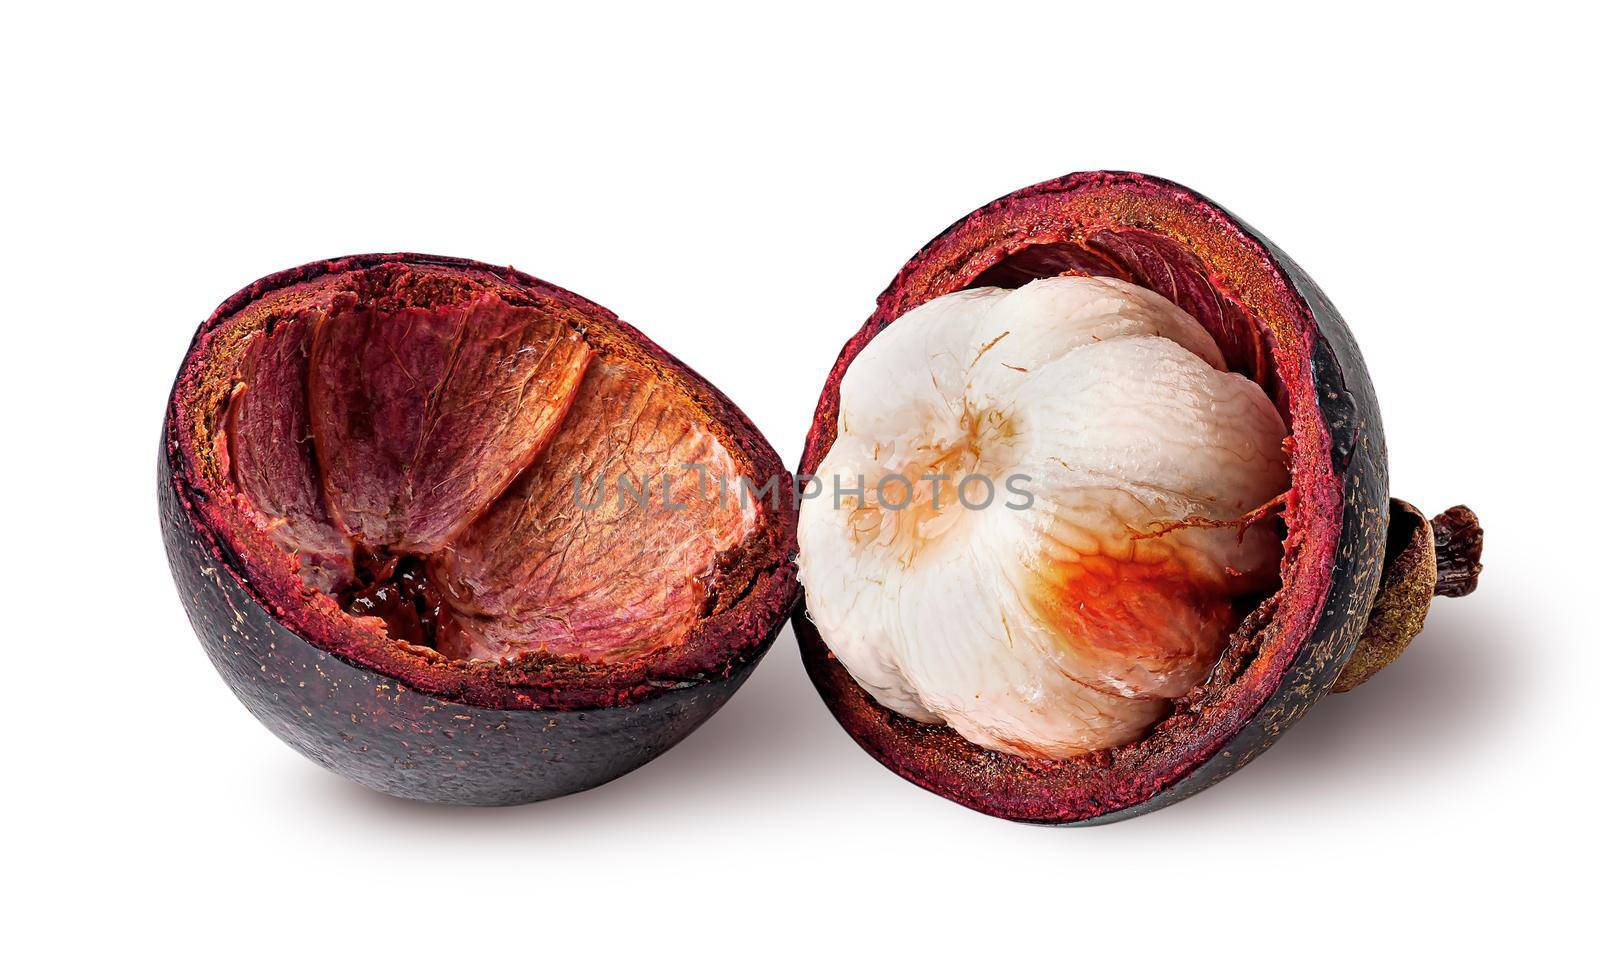 Opened mangosteen and shells near isolated on white background